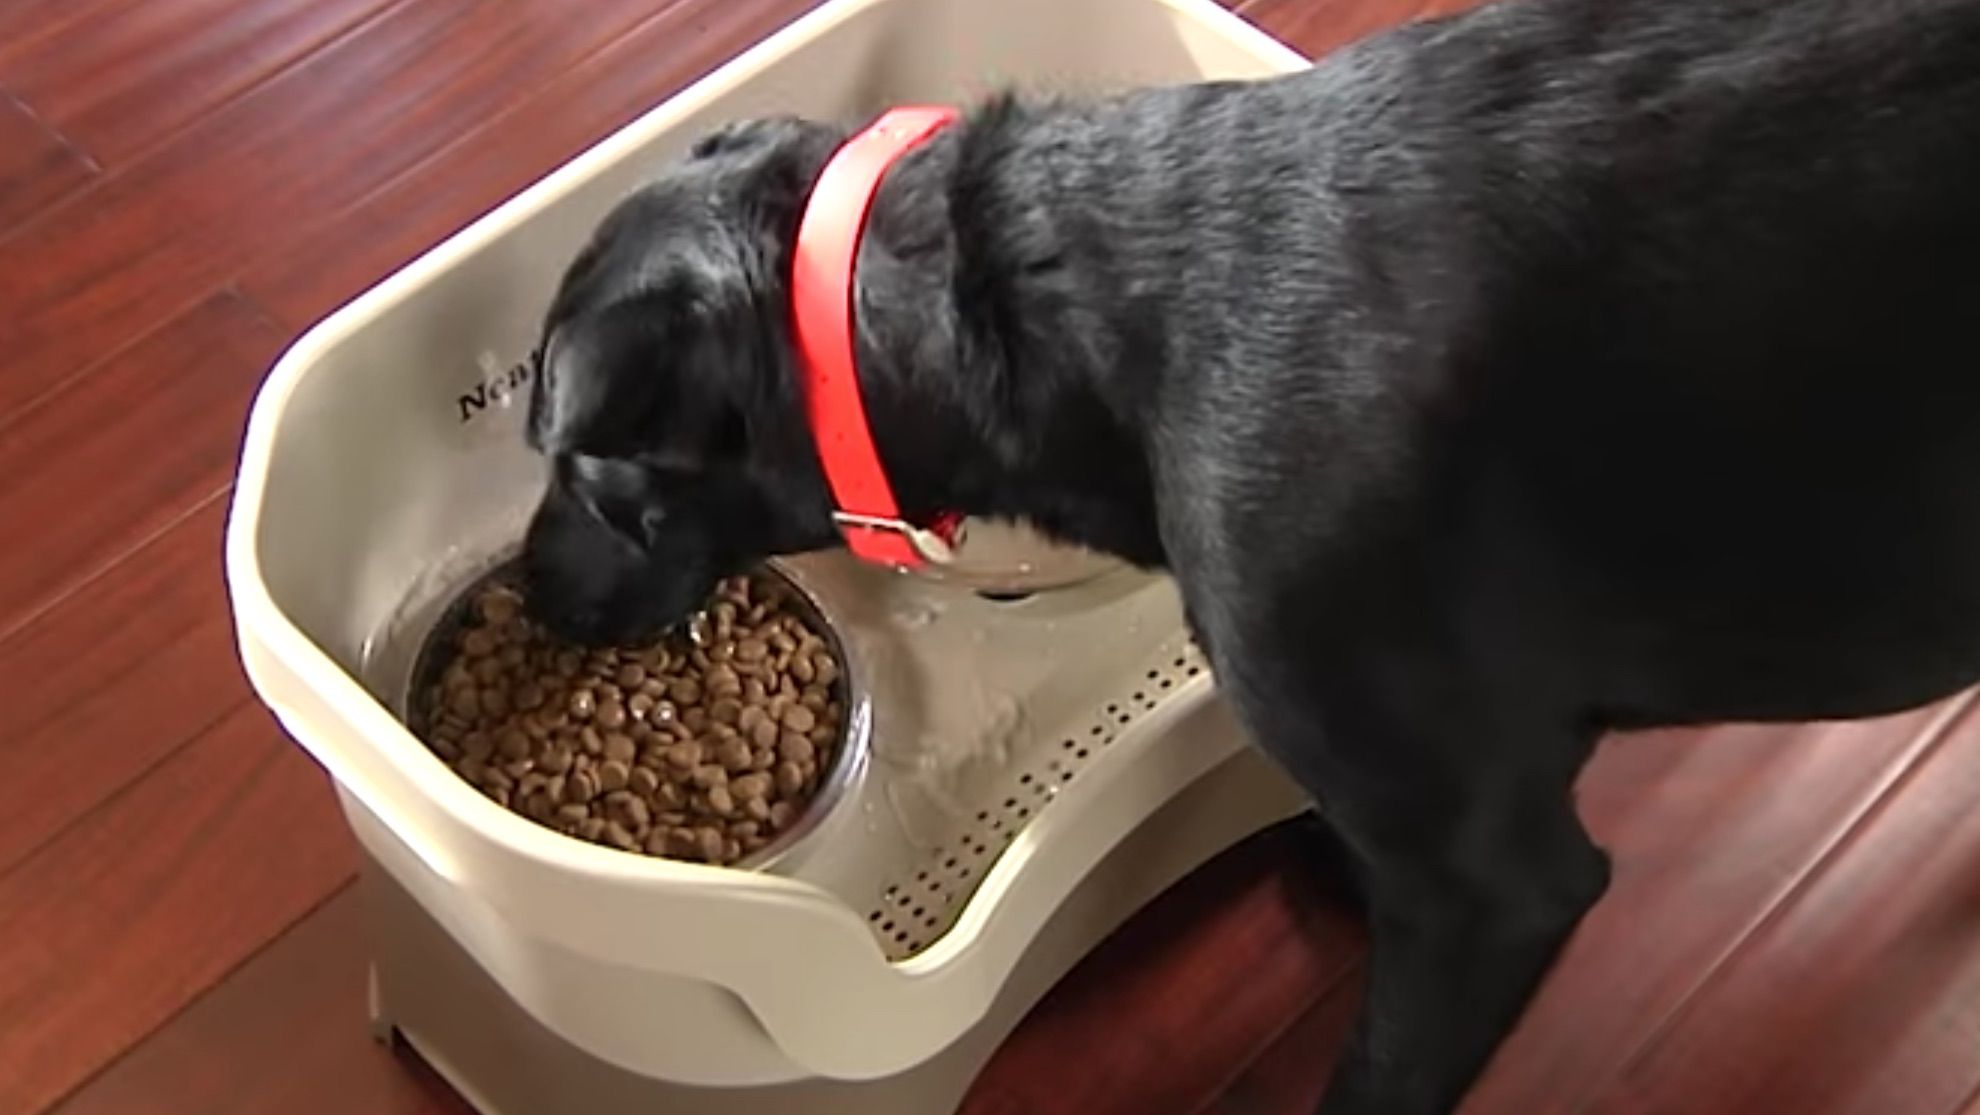 The Best Automatic Dog Feeders of 2019